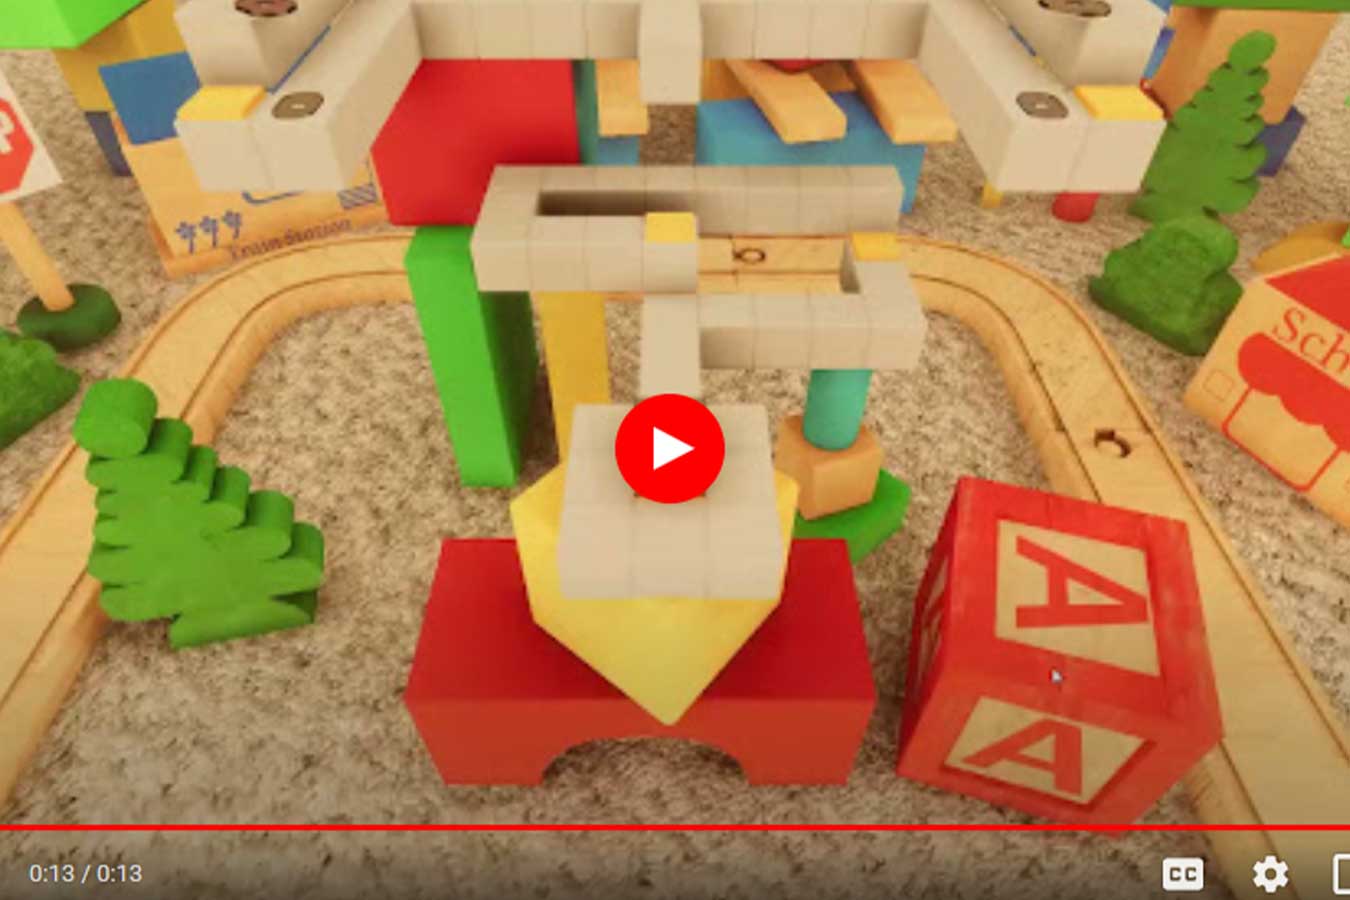 Image of Jacob Hoge's game level that won best of fall term featuring toy blocks, Lego-like toys, and a toy train running on a track.